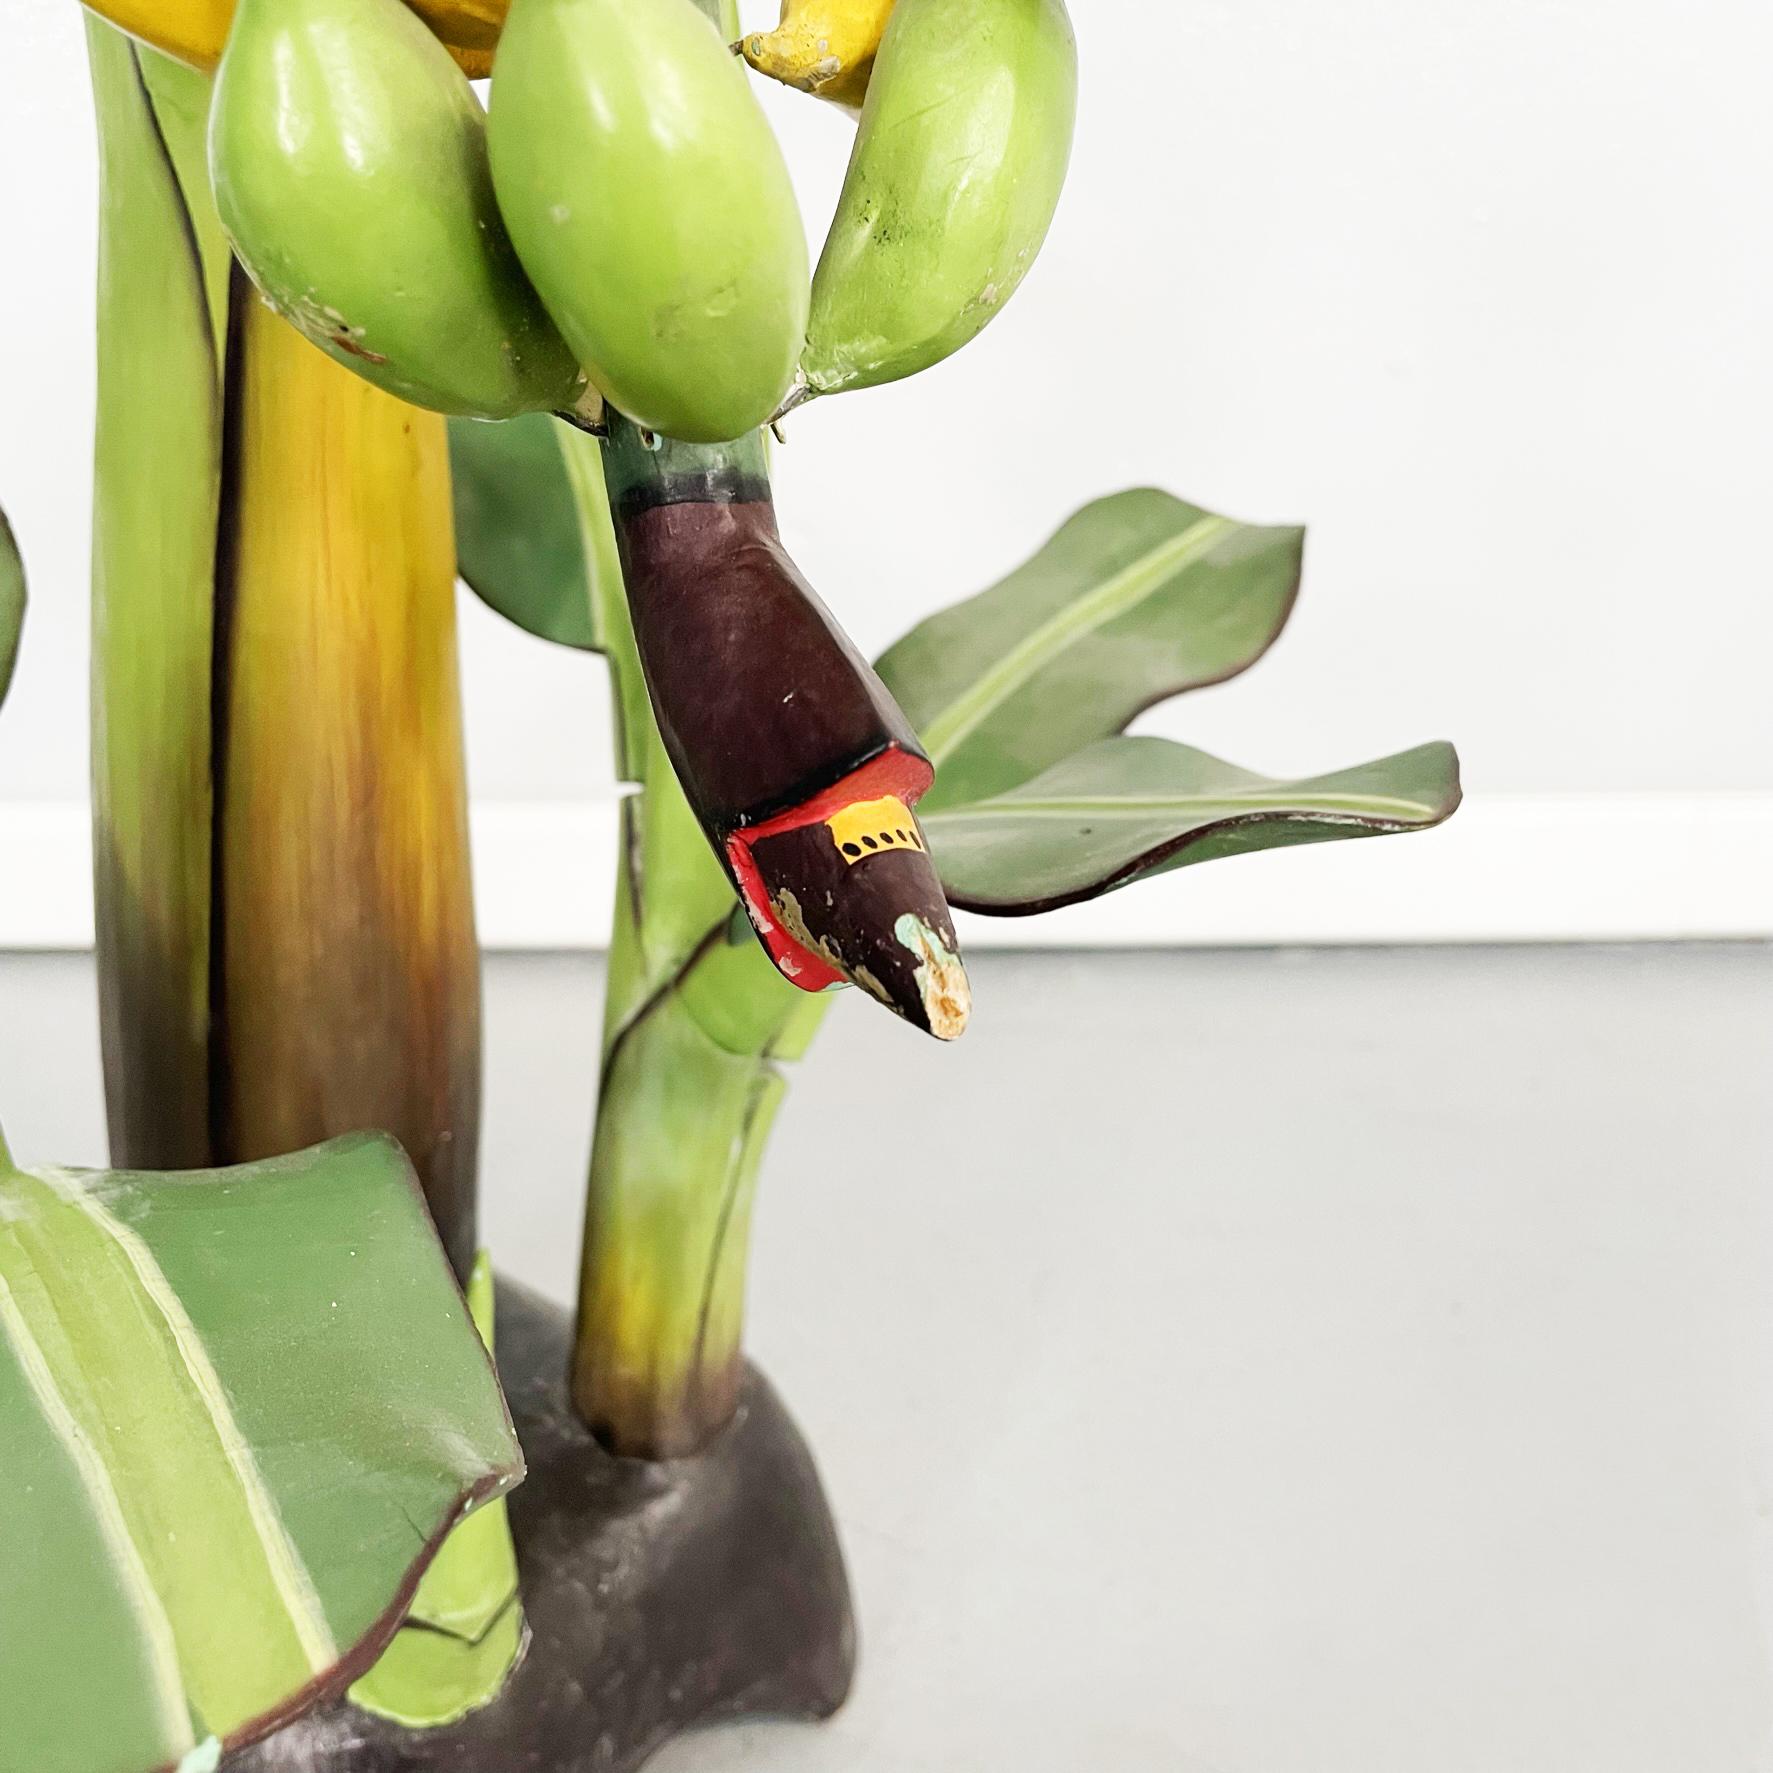 Mid-20th Century Italian Mid-Century Modern Wooden Sculpture of a Banana Plant, 1950s For Sale